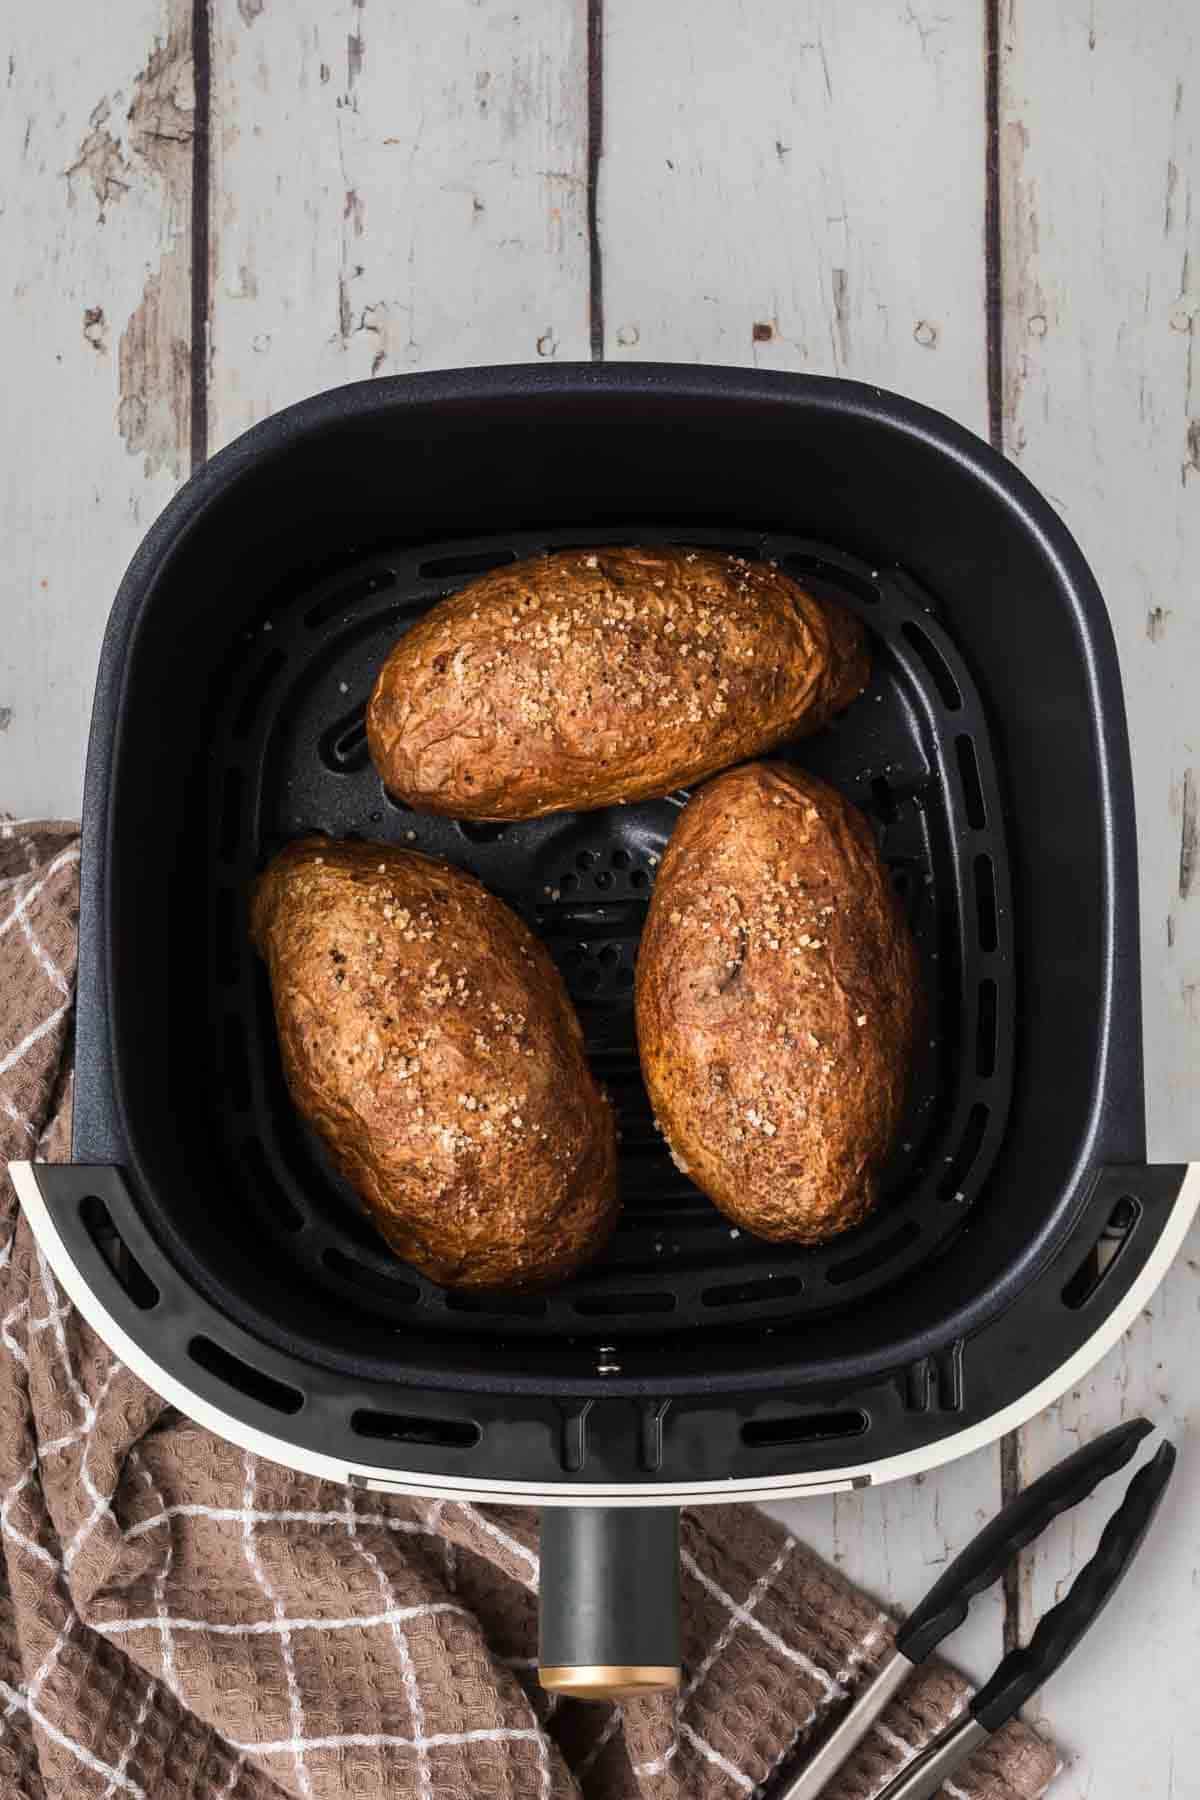 An air fryer basket containing three perfectly baked potatoes seasoned with coarse salt and herbs. The basket is placed on a rustic wooden surface next to a pair of black tongs and a brown and white checkered kitchen towel, showcasing the ultimate air fryer baked potato experience.